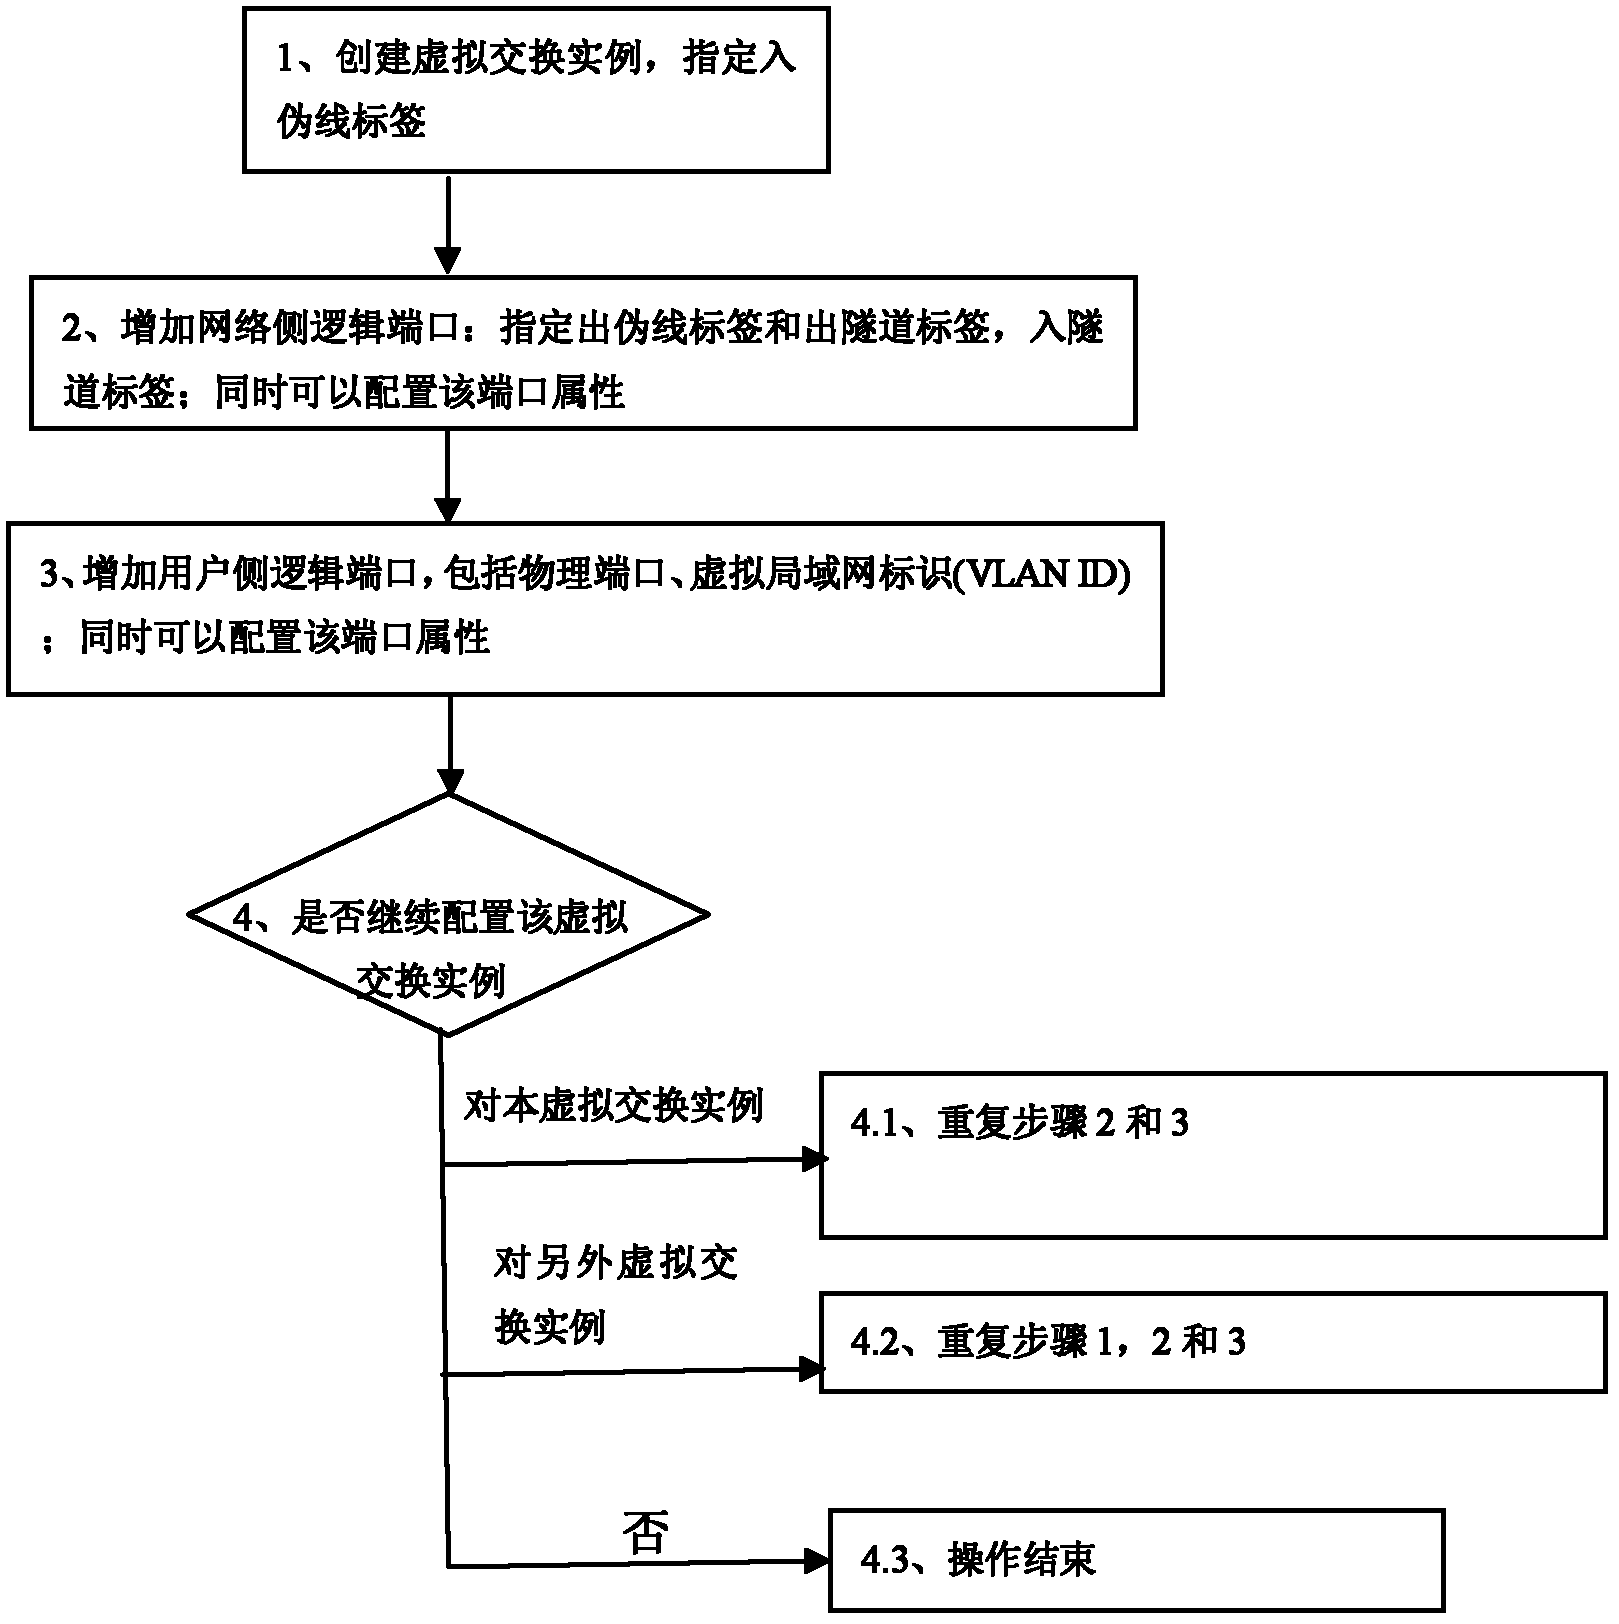 Pseudo-wire labeling method for MPLS (Multiple Protocol Label Switching) network virtual exchange embodiment